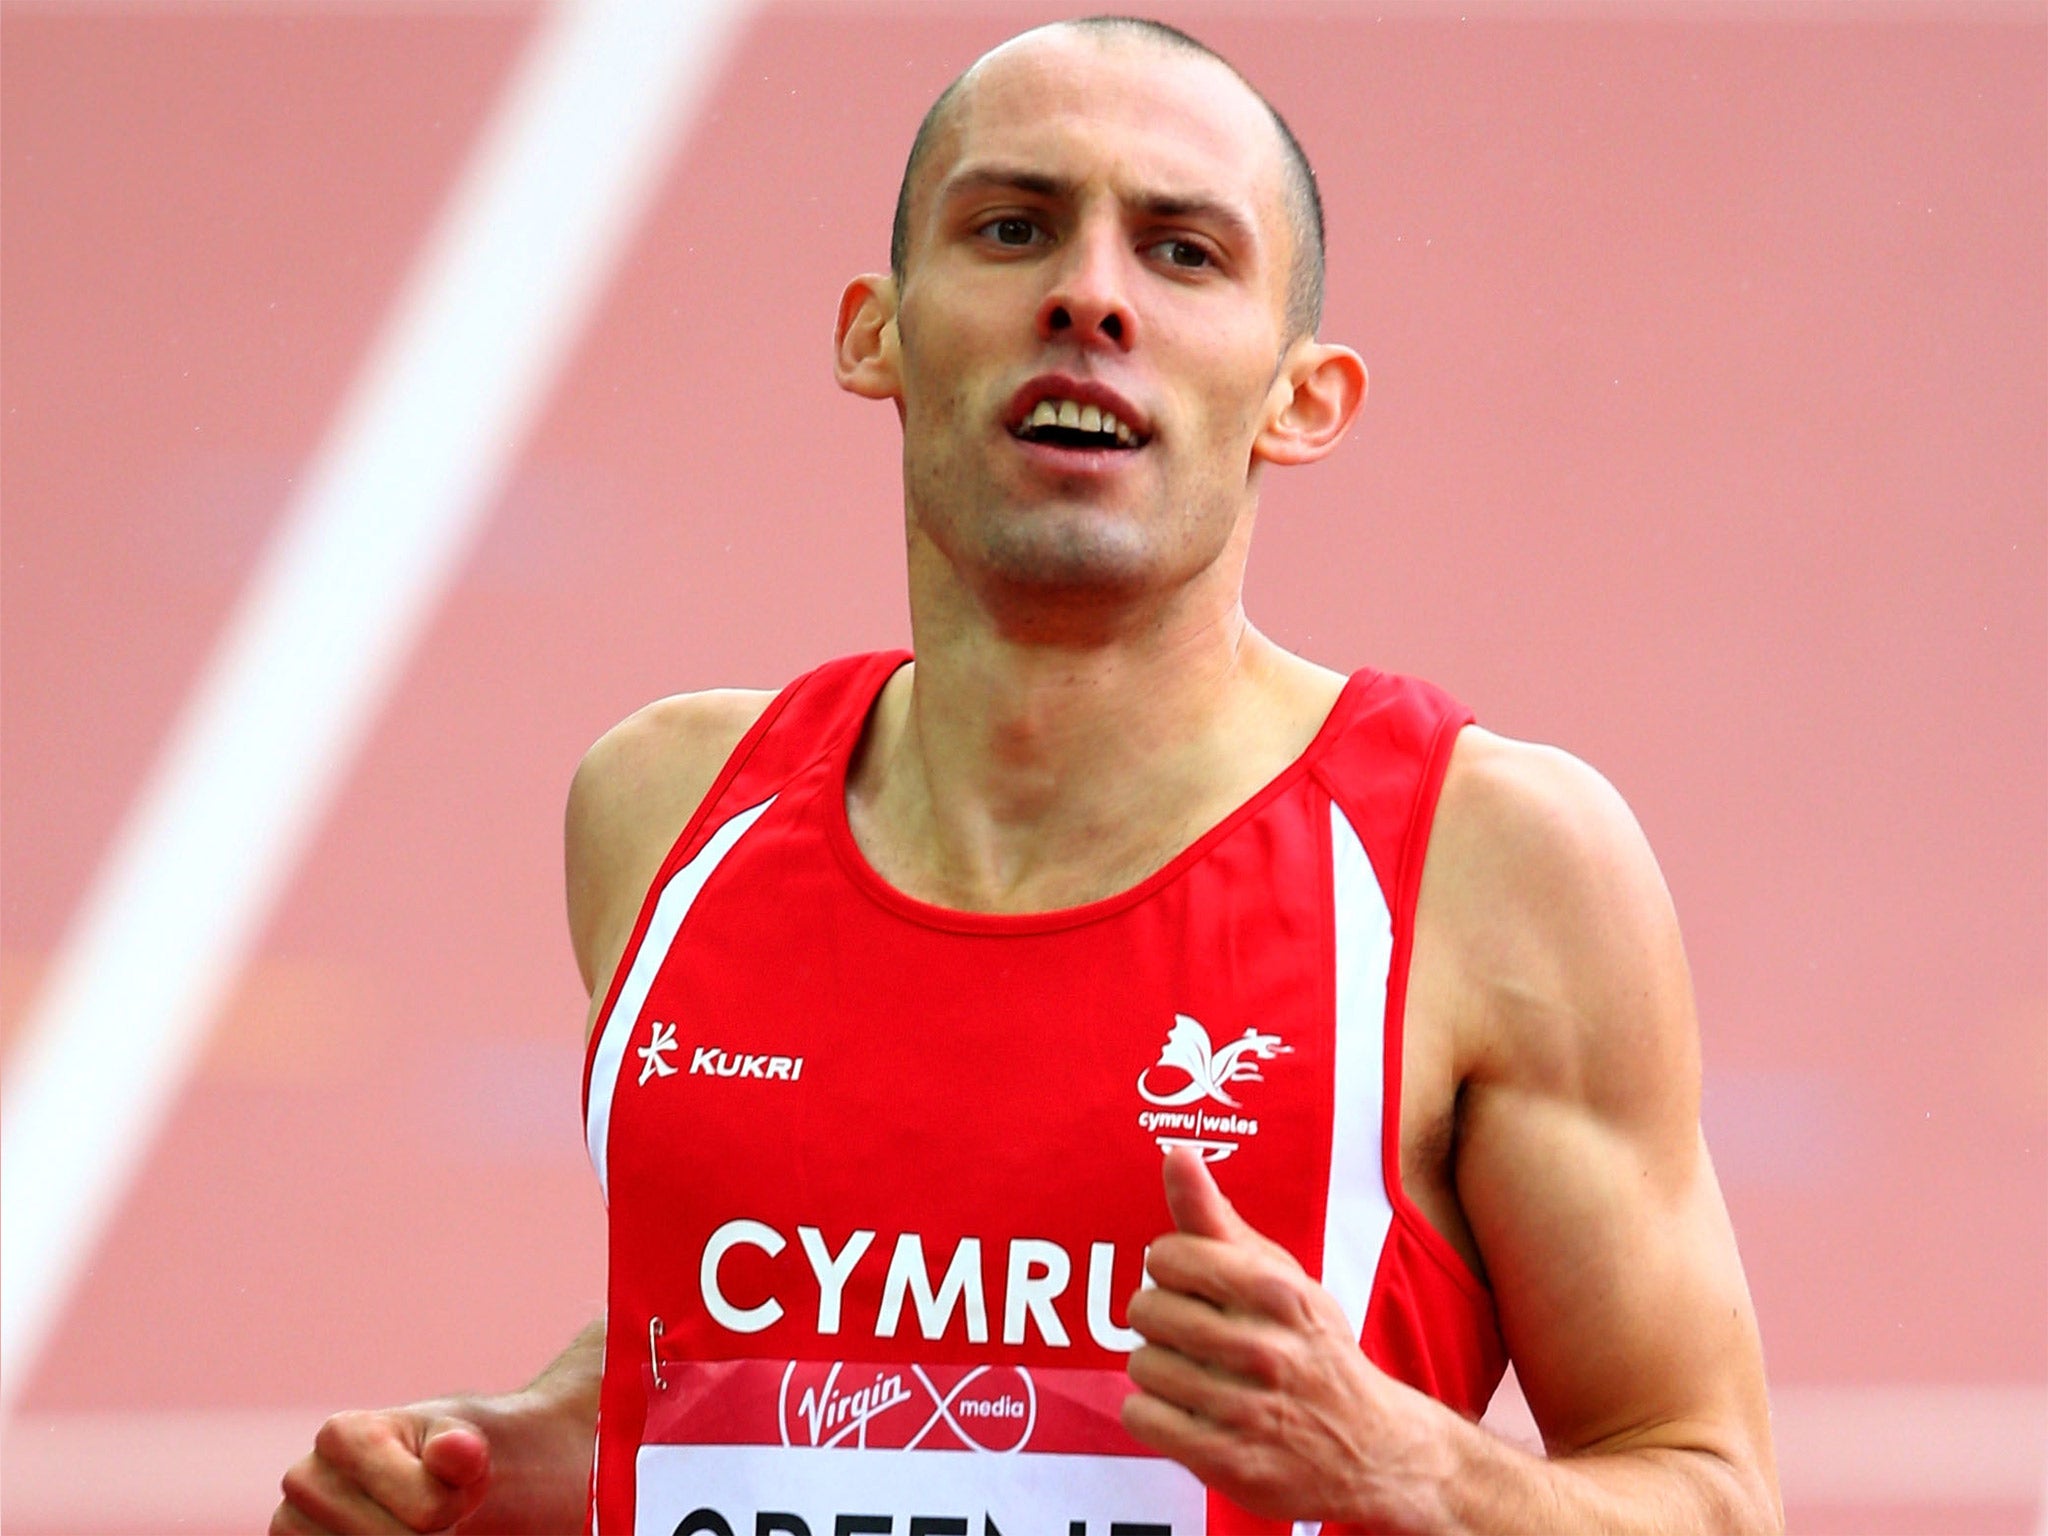 Dai Greene failed to make the 400m hurdles final after a troubled build-up